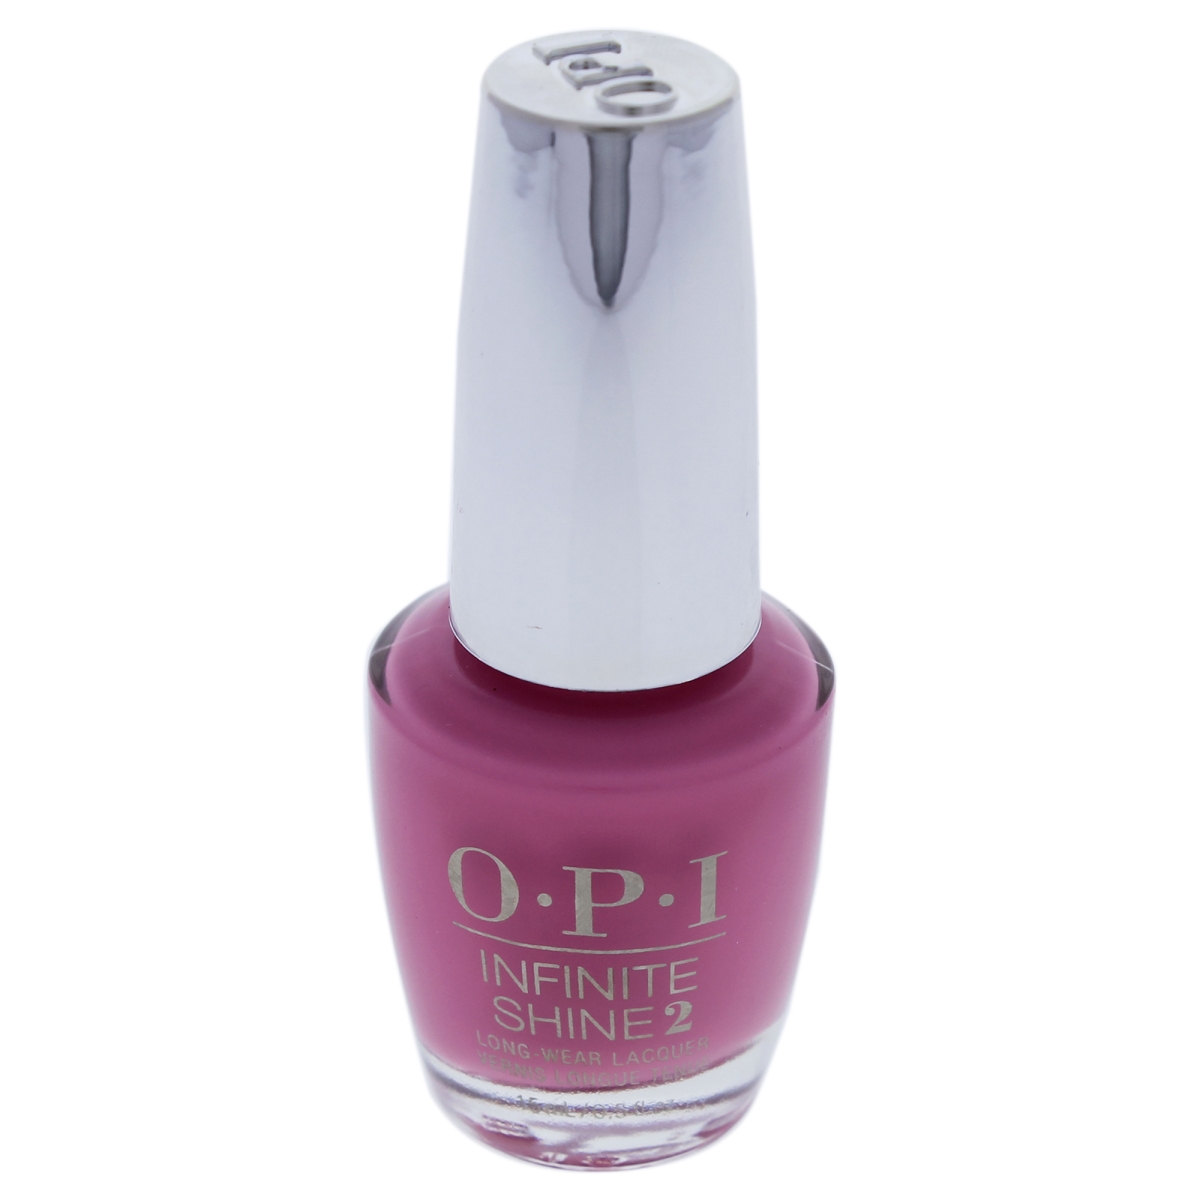 I0088856 Infinite Shine 2 Long-wear Lacquer Nail Polish For Women - Isl P30 Lima Tell You About This Color - 0.5 Oz